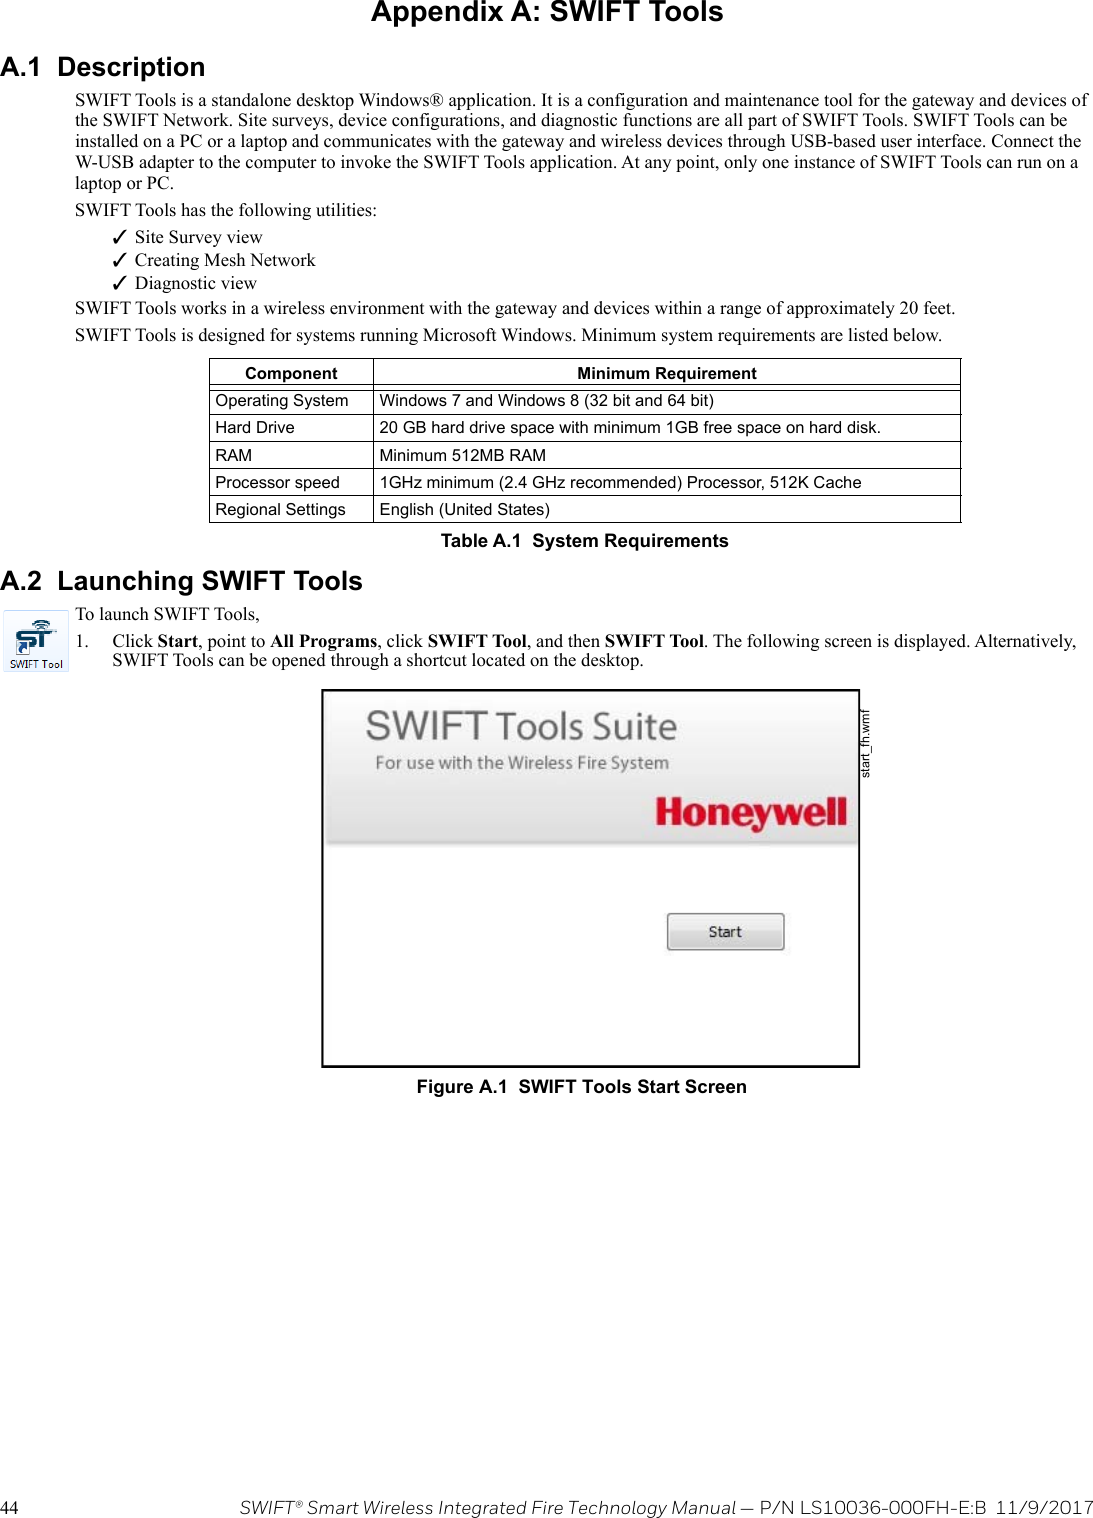 44 SWIFT® Smart Wireless Integrated Fire Technology Manual — P/N LS10036-000FH-E:B  11/9/2017Appendix A: SWIFT ToolsA.1  DescriptionSWIFT Tools is a standalone desktop Windows® application. It is a configuration and maintenance tool for the gateway and devices of the SWIFT Network. Site surveys, device configurations, and diagnostic functions are all part of SWIFT Tools. SWIFT Tools can be installed on a PC or a laptop and communicates with the gateway and wireless devices through USB-based user interface. Connect the W-USB adapter to the computer to invoke the SWIFT Tools application. At any point, only one instance of SWIFT Tools can run on a laptop or PC.SWIFT Tools has the following utilities:Site Survey viewCreating Mesh NetworkDiagnostic viewSWIFT Tools works in a wireless environment with the gateway and devices within a range of approximately 20 feet.SWIFT Tools is designed for systems running Microsoft Windows. Minimum system requirements are listed below. A.2  Launching SWIFT ToolsTo launch SWIFT Tools,1. Click Start, point to All Programs, click SWIFT Tool, and then SWIFT Tool. The following screen is displayed. Alternatively, SWIFT Tools can be opened through a shortcut located on the desktop.                                  Component Minimum RequirementOperating System Windows 7 and Windows 8 (32 bit and 64 bit)Hard Drive 20 GB hard drive space with minimum 1GB free space on hard disk.RAM Minimum 512MB RAMProcessor speed 1GHz minimum (2.4 GHz recommended) Processor, 512K CacheRegional Settings English (United States)Table A.1  System Requirementsstart_fh.wmfFigure A.1  SWIFT Tools Start Screen